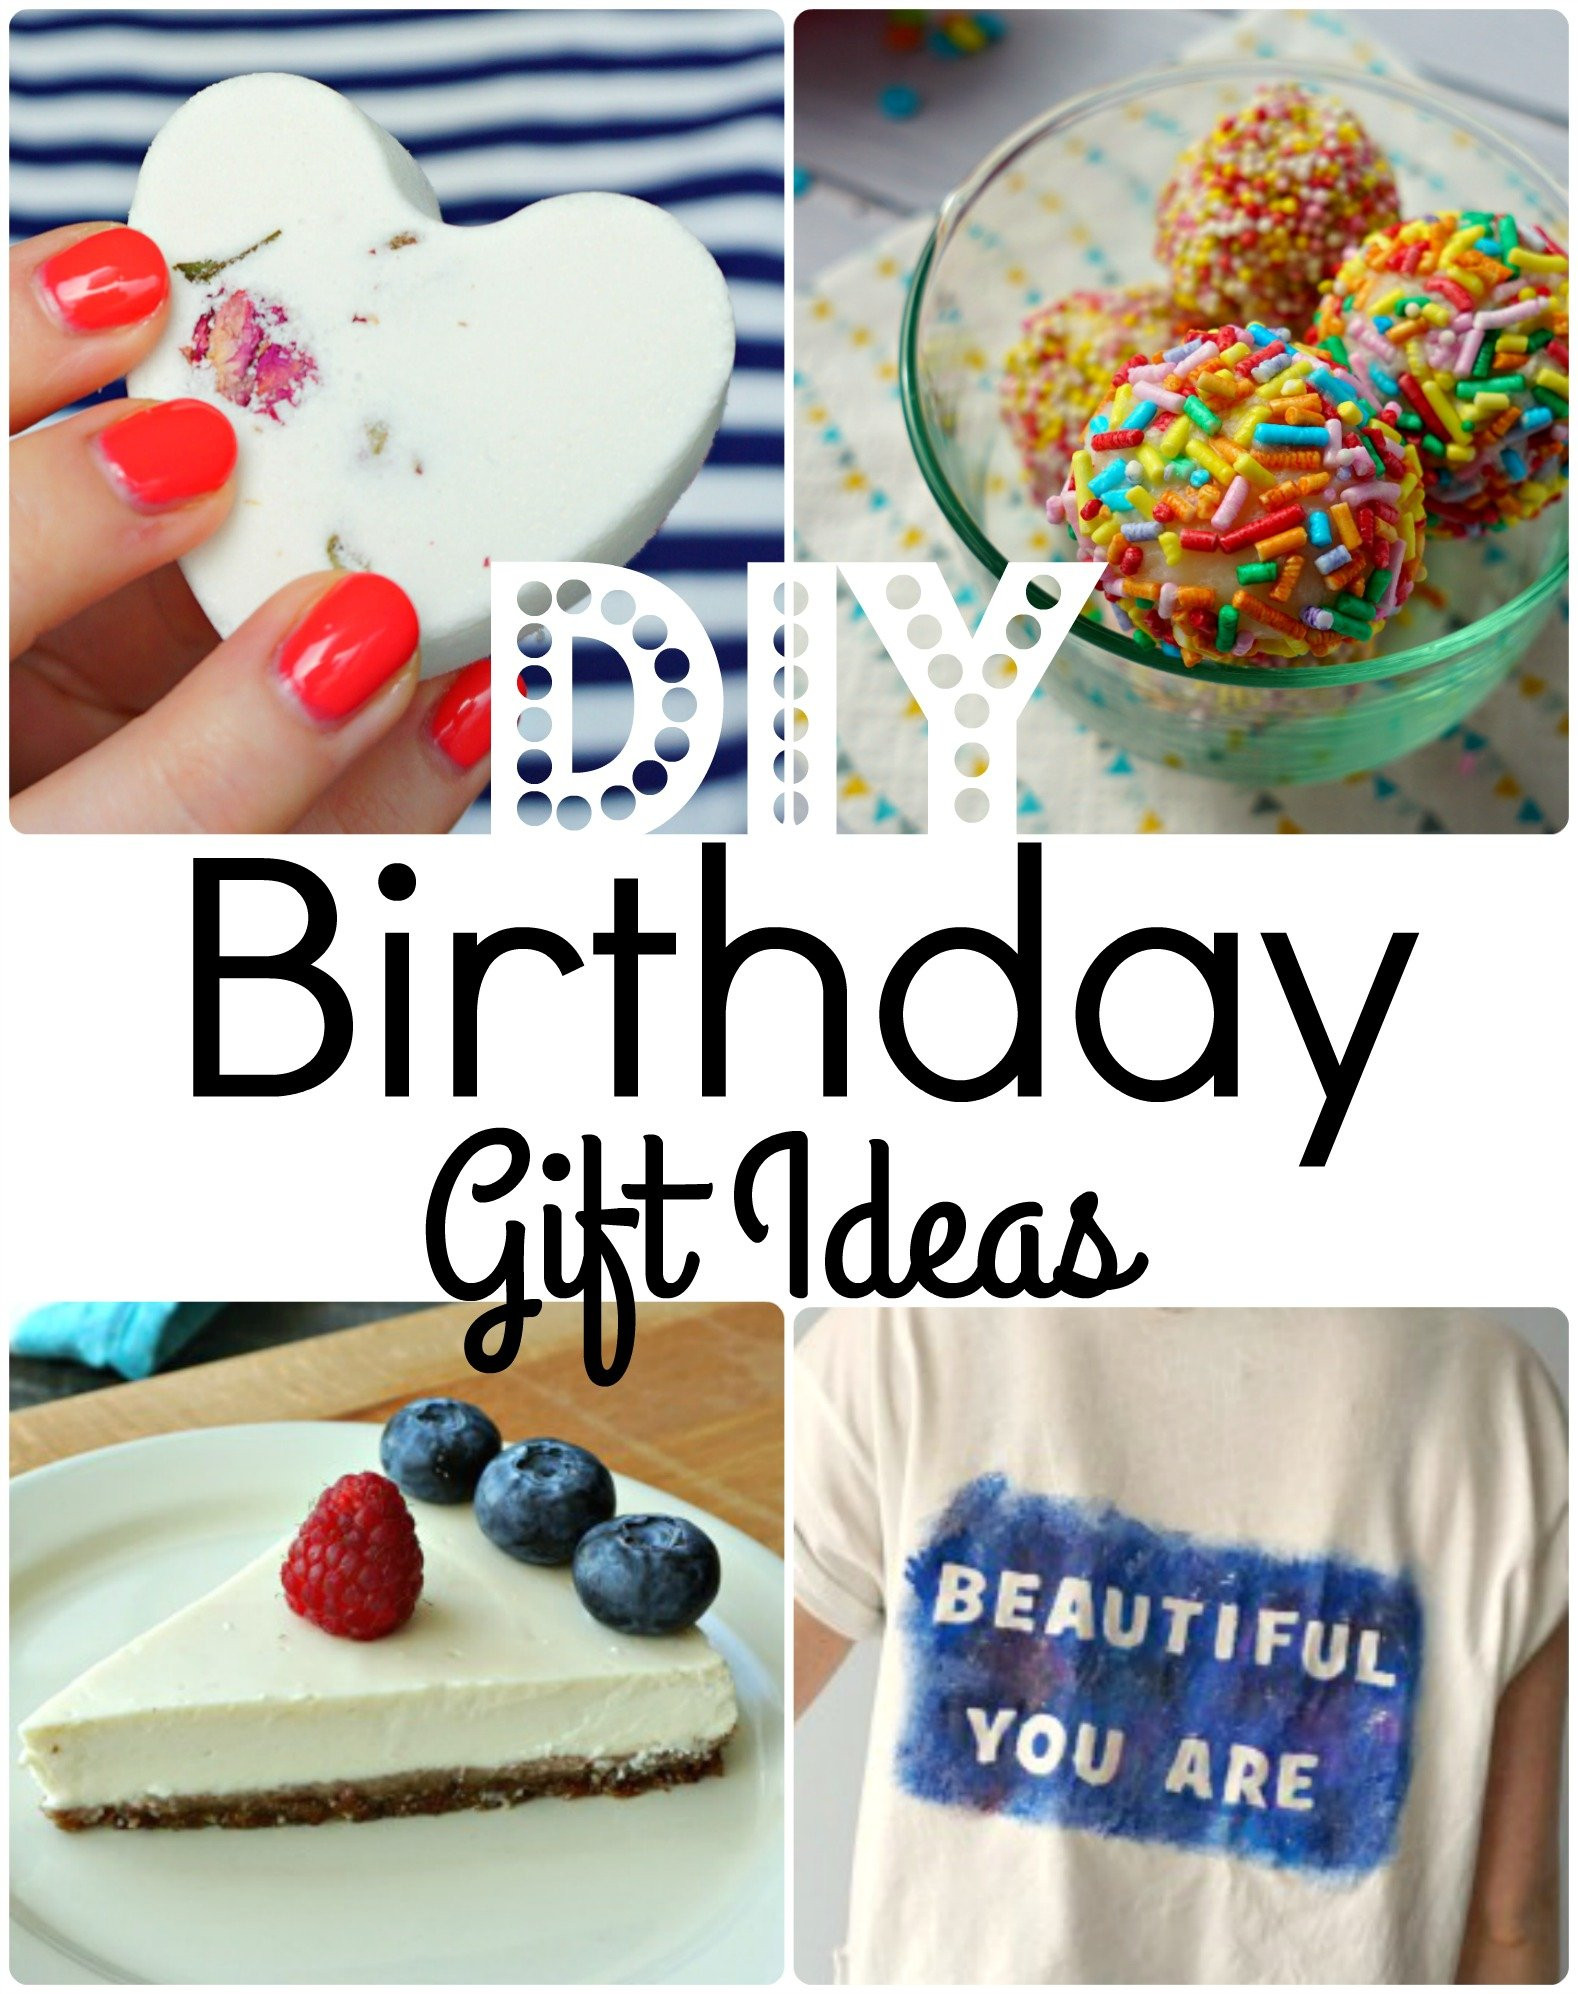 DIY Bday Gift Ideas
 7 Easy DIY Birthday Gift Ideas that are always a hit The